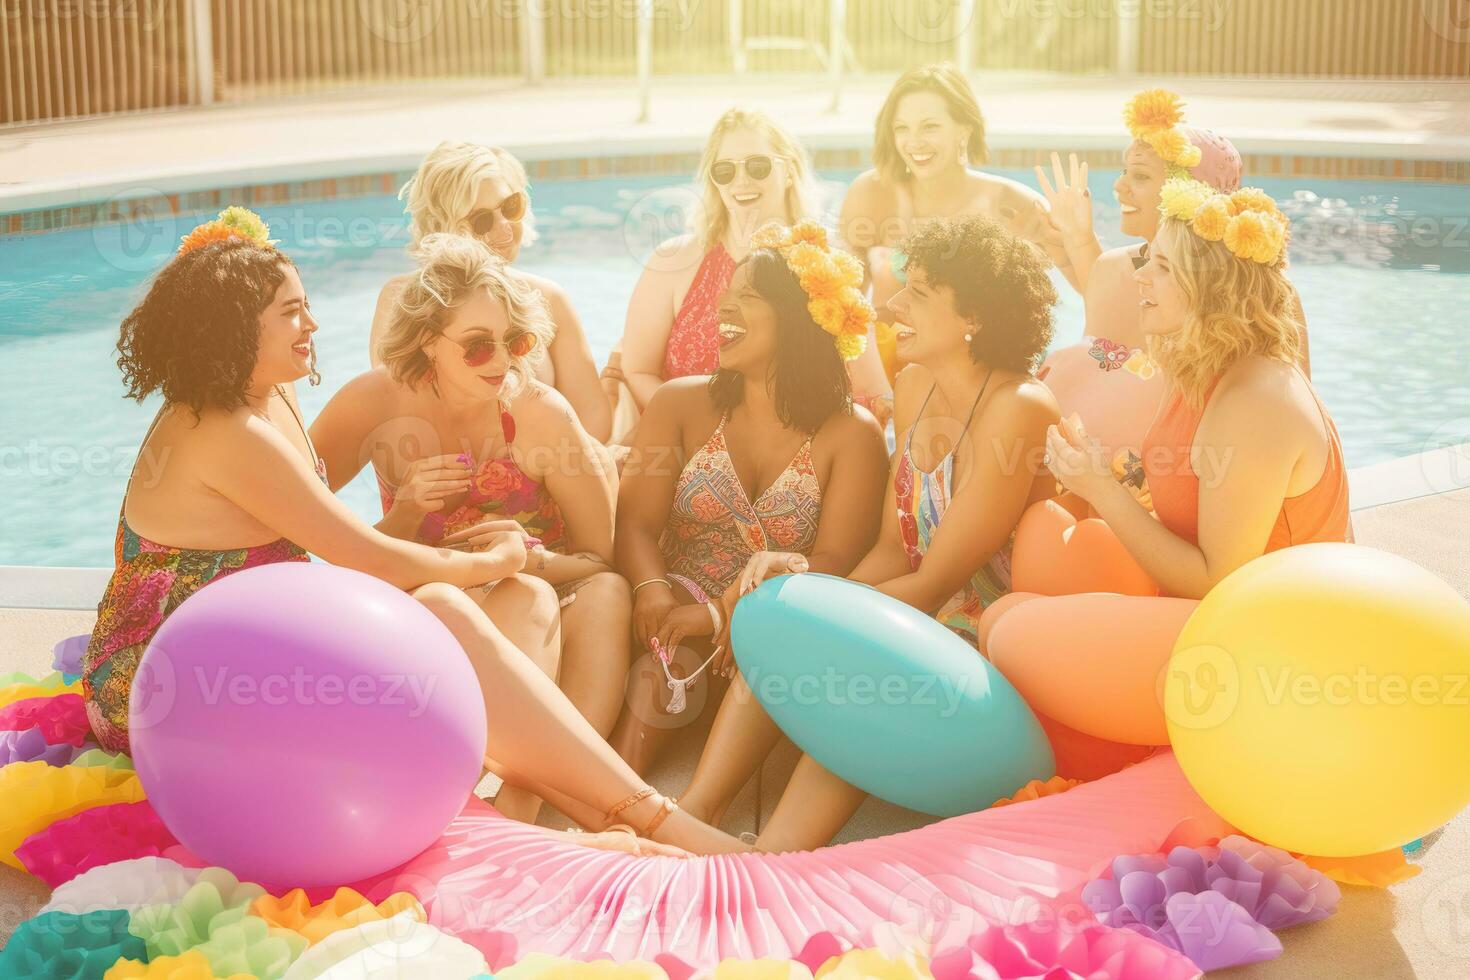 A group of women in coordinating two-piece swimsuits lounge together on a pool deck, surrounded by colorful decorations and party favors. The vibe is festive and fun. Generative AI photo